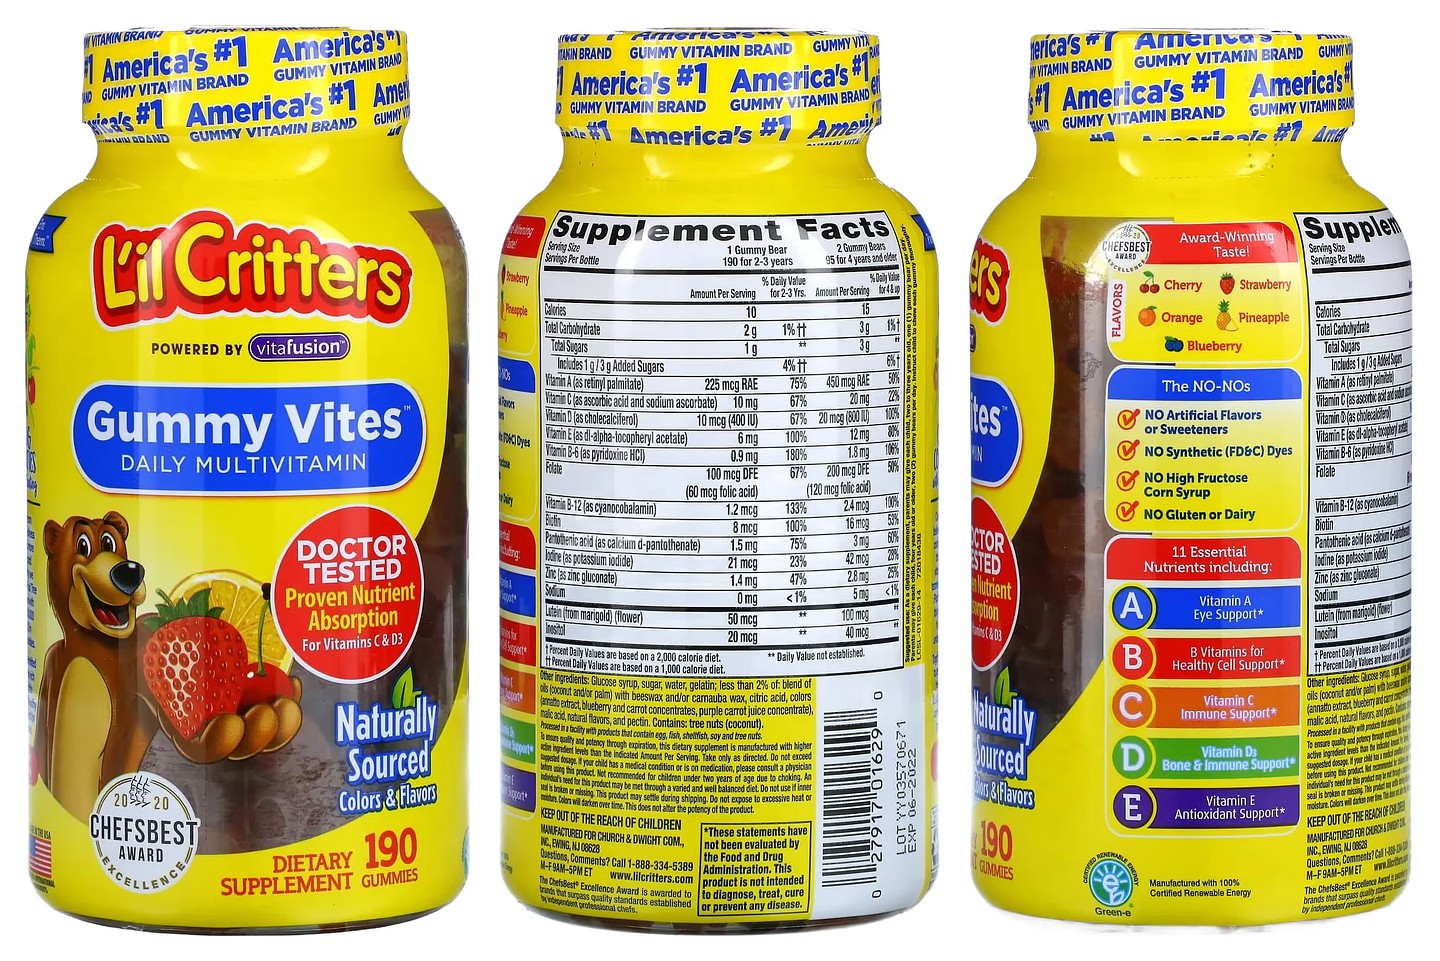 L'il Critters, Gummy Vites Daily Multivitamin packaging